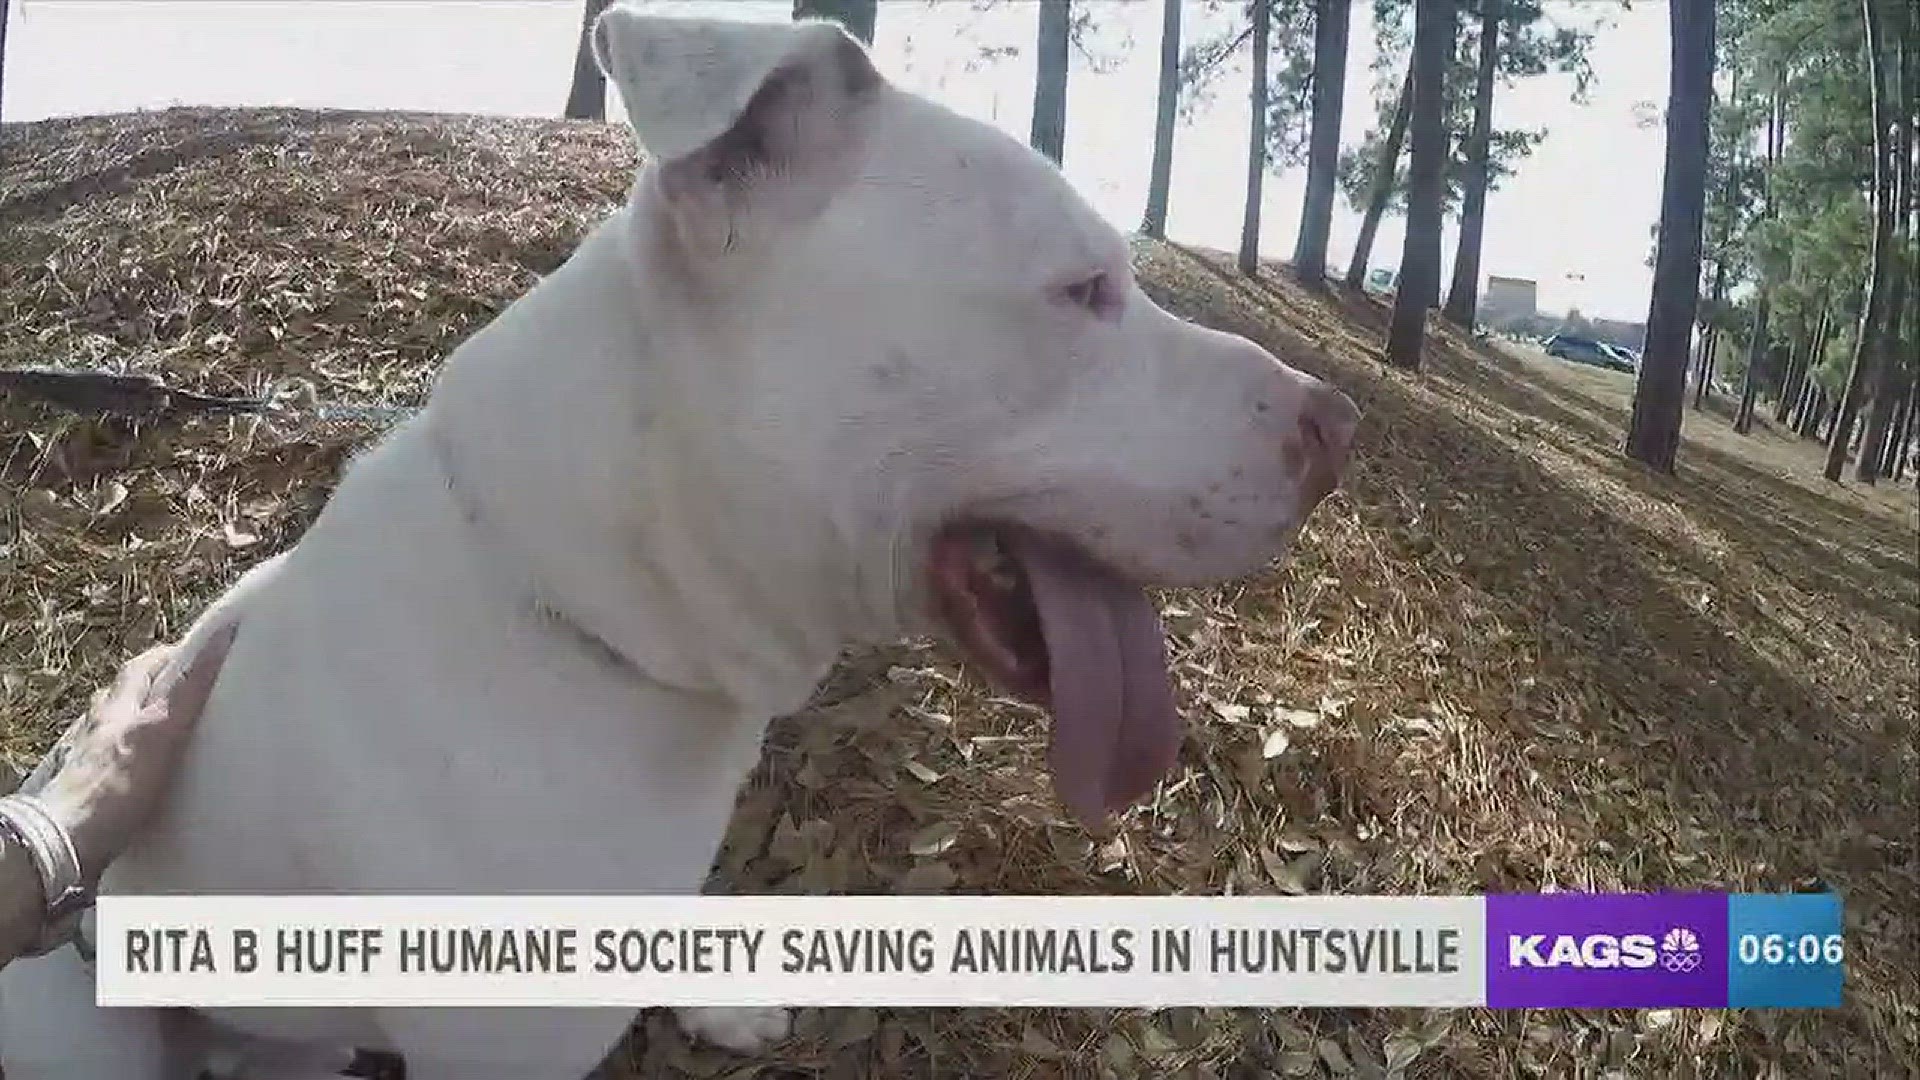 For the last few weeks we've been visiting animal shelters and rescues across the area featuring animals available for adoption. This week we went out to Huntsville to learn more about a humane society named after a Sam Houston State professor who dedicat